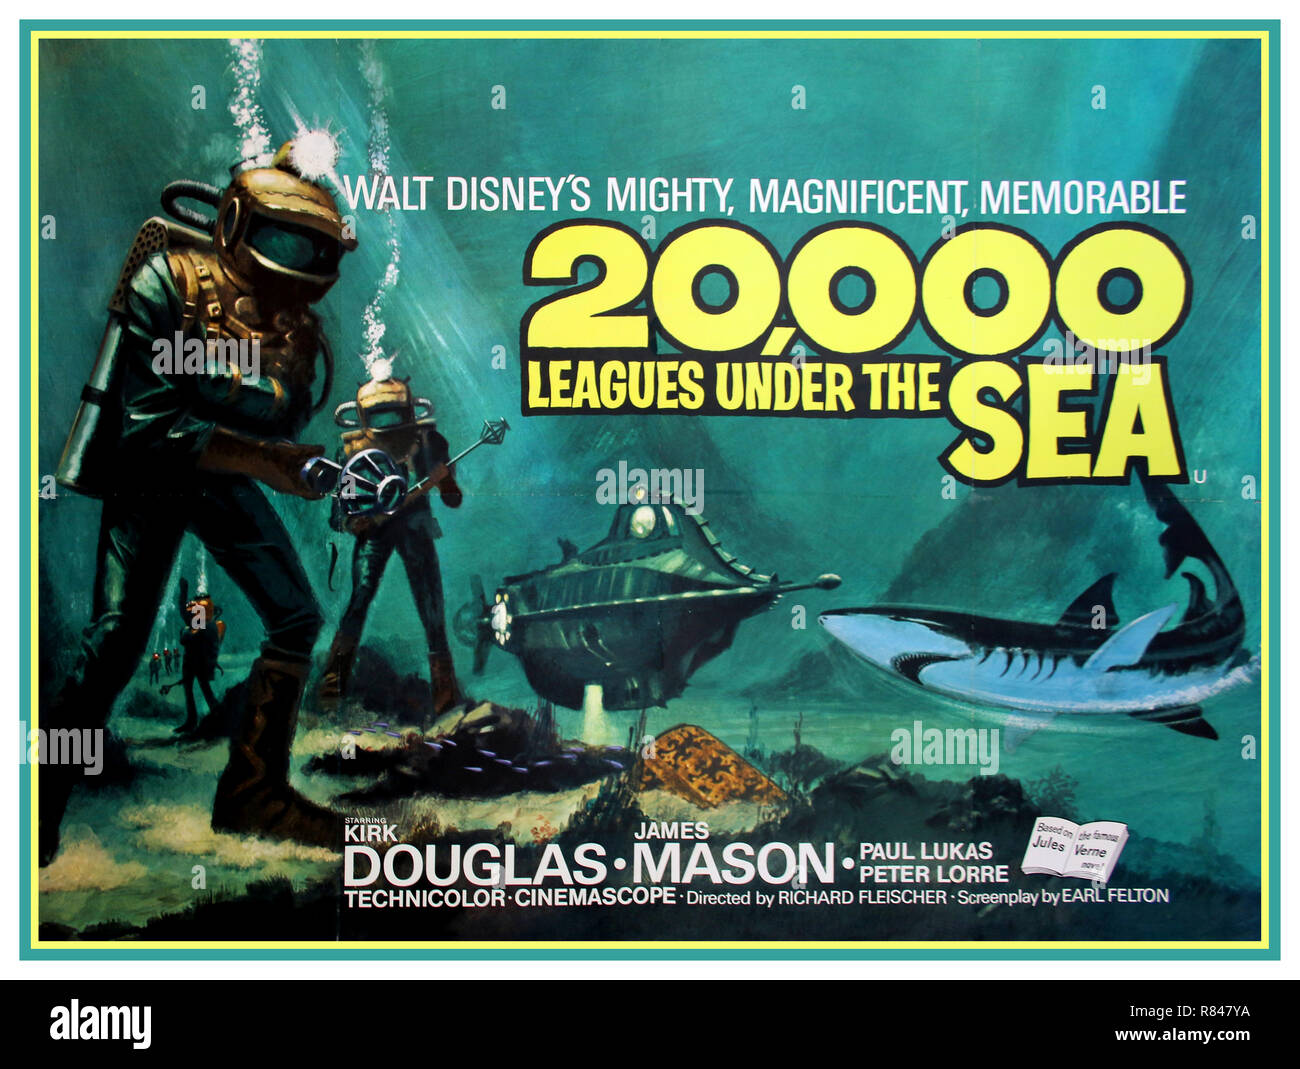 20,000 Leagues Under The Sea 1955 Travel Poster Disney Tomorrowland 